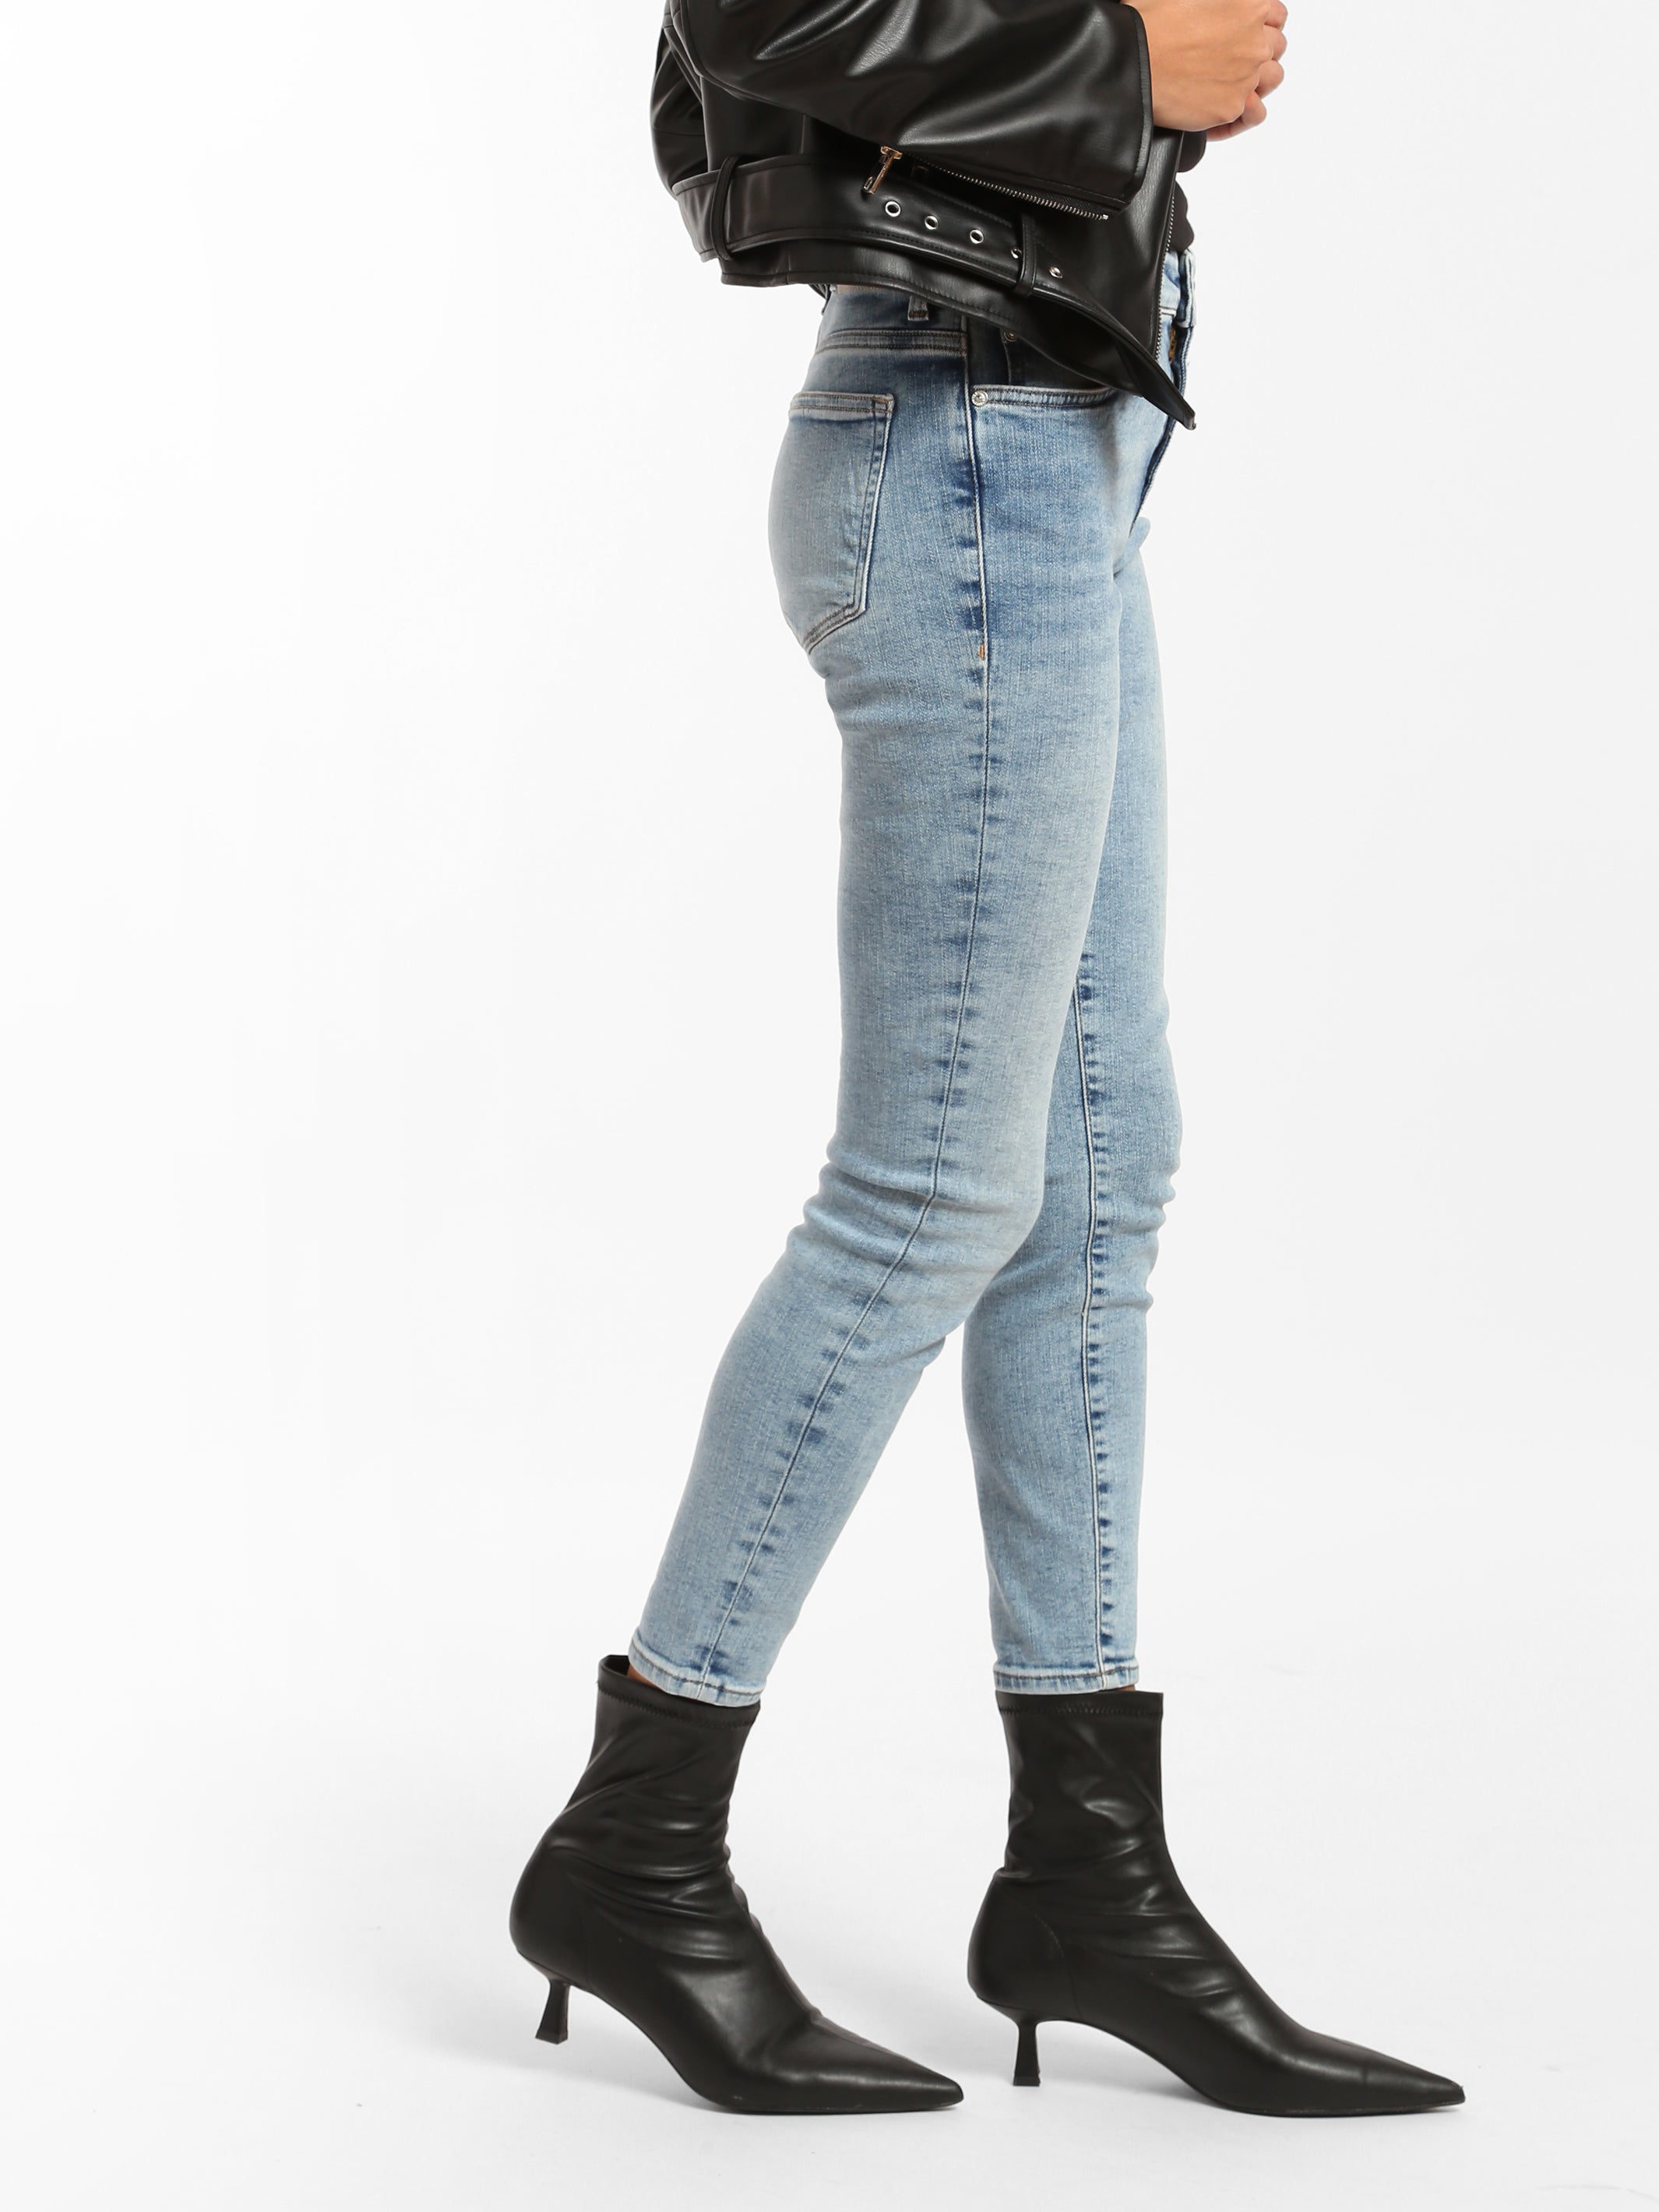 Coco High Rise Skinny Jeans in Light Brushed Denim - BROOKLYN INDUSTRIES